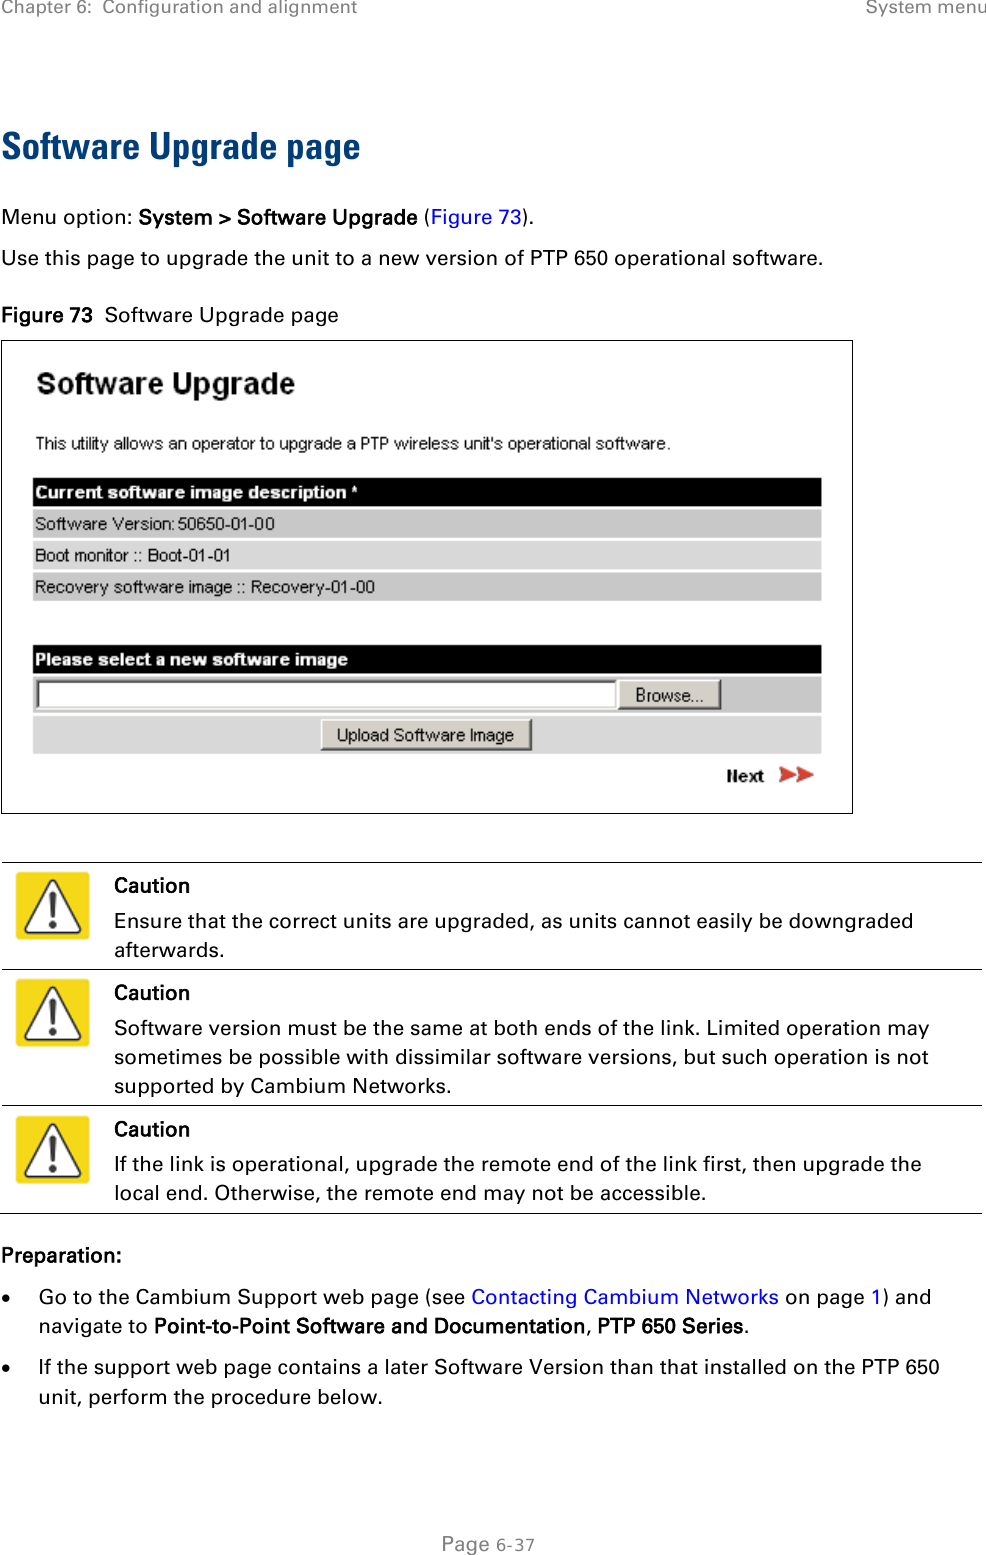 Chapter 6:  Configuration and alignment System menu  Software Upgrade page Menu option: System &gt; Software Upgrade (Figure 73). Use this page to upgrade the unit to a new version of PTP 650 operational software. Figure 73  Software Upgrade page    Caution Ensure that the correct units are upgraded, as units cannot easily be downgraded afterwards.  Caution Software version must be the same at both ends of the link. Limited operation may sometimes be possible with dissimilar software versions, but such operation is not supported by Cambium Networks.  Caution If the link is operational, upgrade the remote end of the link first, then upgrade the local end. Otherwise, the remote end may not be accessible. Preparation: • Go to the Cambium Support web page (see Contacting Cambium Networks on page 1) and navigate to Point-to-Point Software and Documentation, PTP 650 Series. • If the support web page contains a later Software Version than that installed on the PTP 650 unit, perform the procedure below.  Page 6-37 